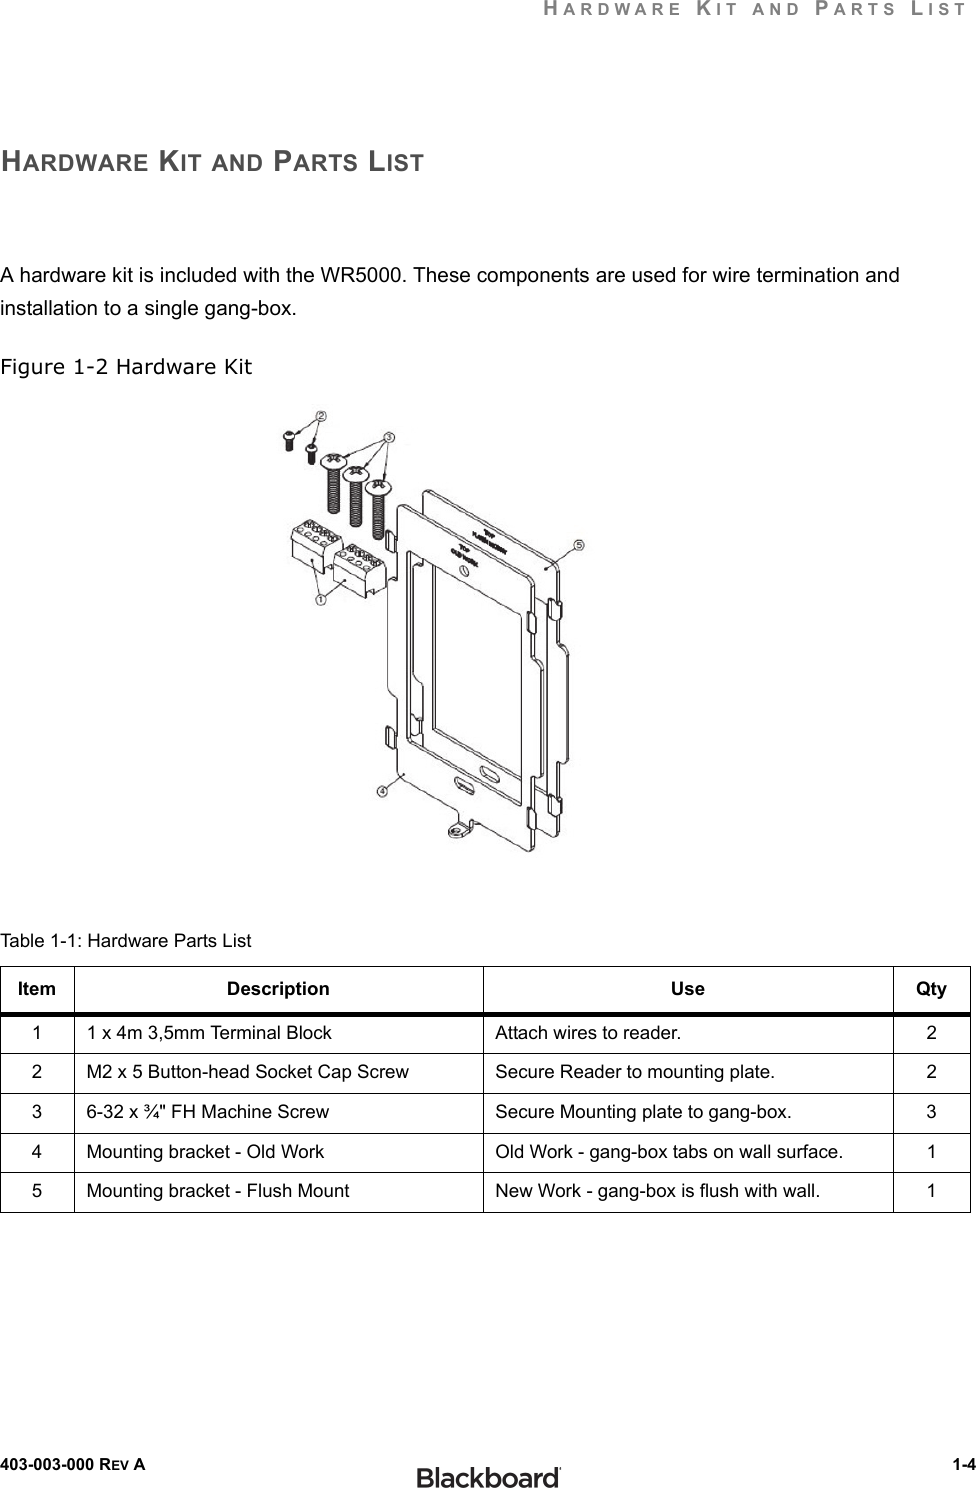 HARDWARE KIT AND PARTS LIST403-003-000 REV A  1-4HARDWARE KIT AND PARTS LISTA hardware kit is included with the WR5000. These components are used for wire termination and installation to a single gang-box.Figure 1-2 Hardware KitTable 1-1: Hardware Parts ListItem Description Use Qty1 1 x 4m 3,5mm Terminal Block Attach wires to reader. 22 M2 x 5 Button-head Socket Cap Screw Secure Reader to mounting plate. 23 6-32 x ¾&quot; FH Machine Screw Secure Mounting plate to gang-box. 34 Mounting bracket - Old Work Old Work - gang-box tabs on wall surface. 15 Mounting bracket - Flush Mount New Work - gang-box is flush with wall. 1